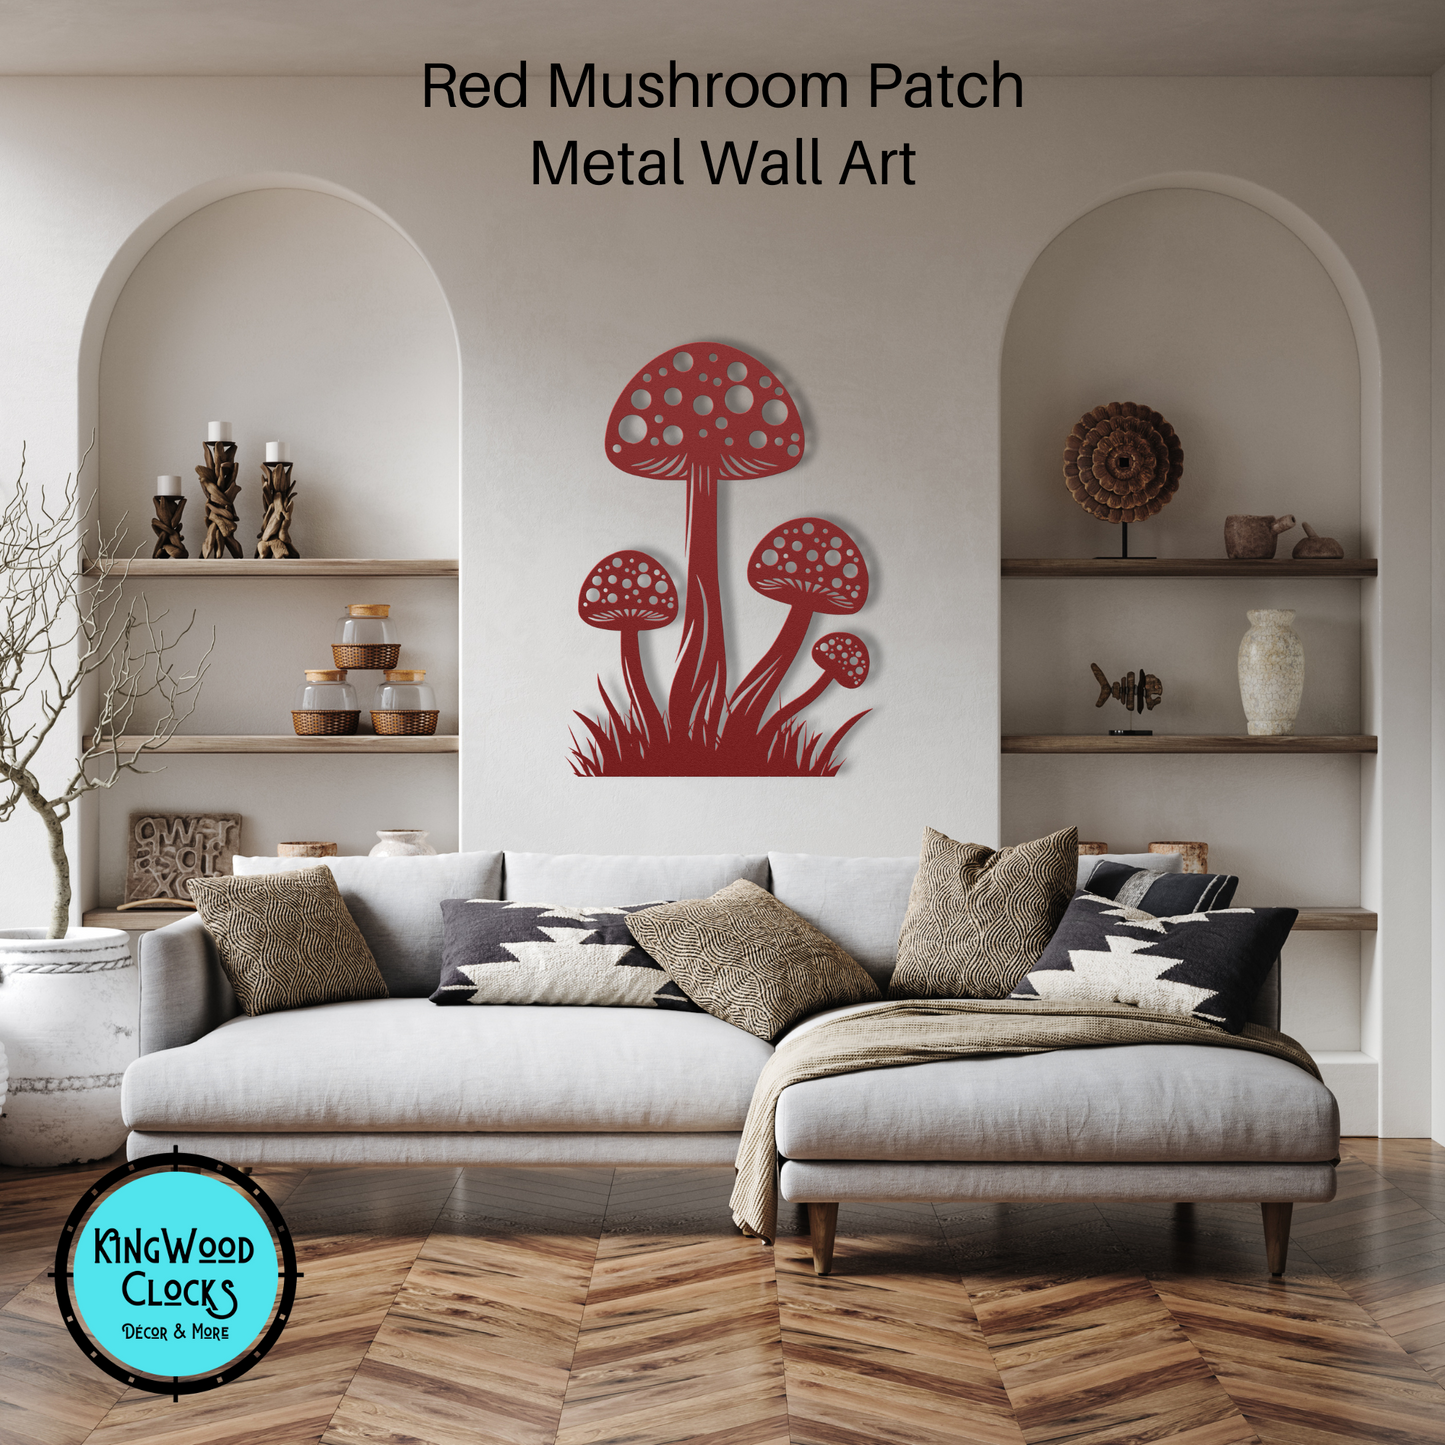 Mushroom patch Metal Wall Art, Toadstool Boho Wall Hanging, Earthy Living, Fungus Room Decor, Psychedelic Mushroom Garden, Mycelium Nerd red in living room over couch